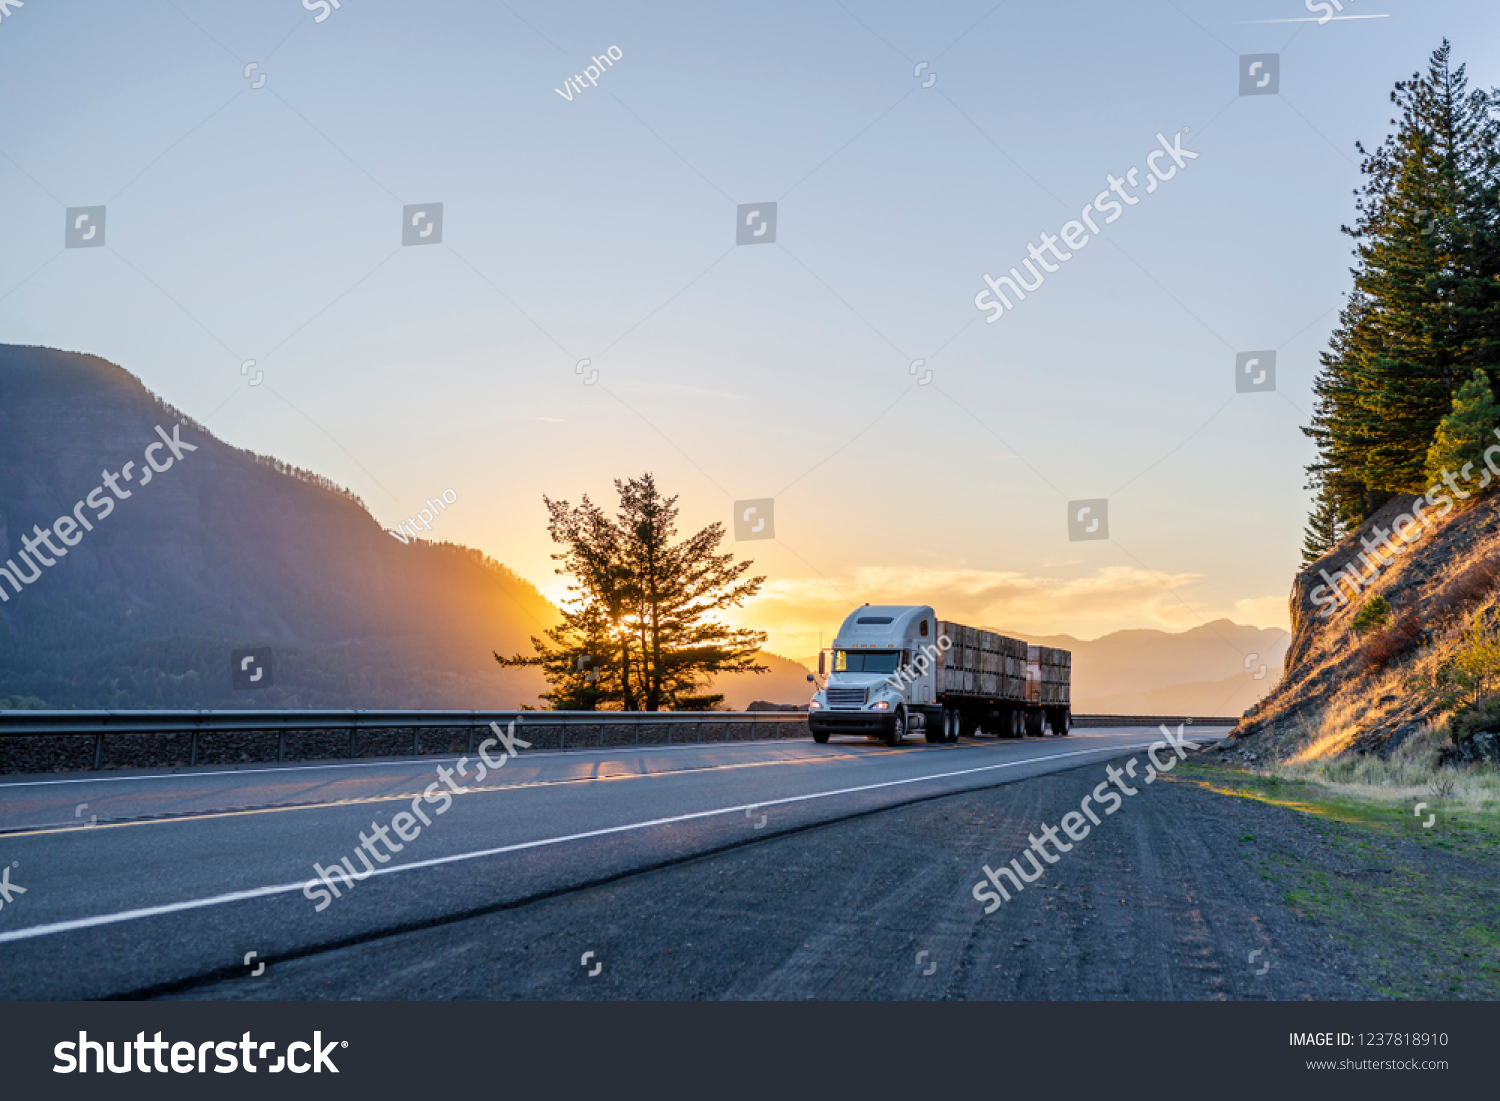 Big rig American white long haul powerful semi truck transporting boxes with fruits on flat bed semi trailer on straight evening road with scenic sunset in Columbia River Gorge #1237818910